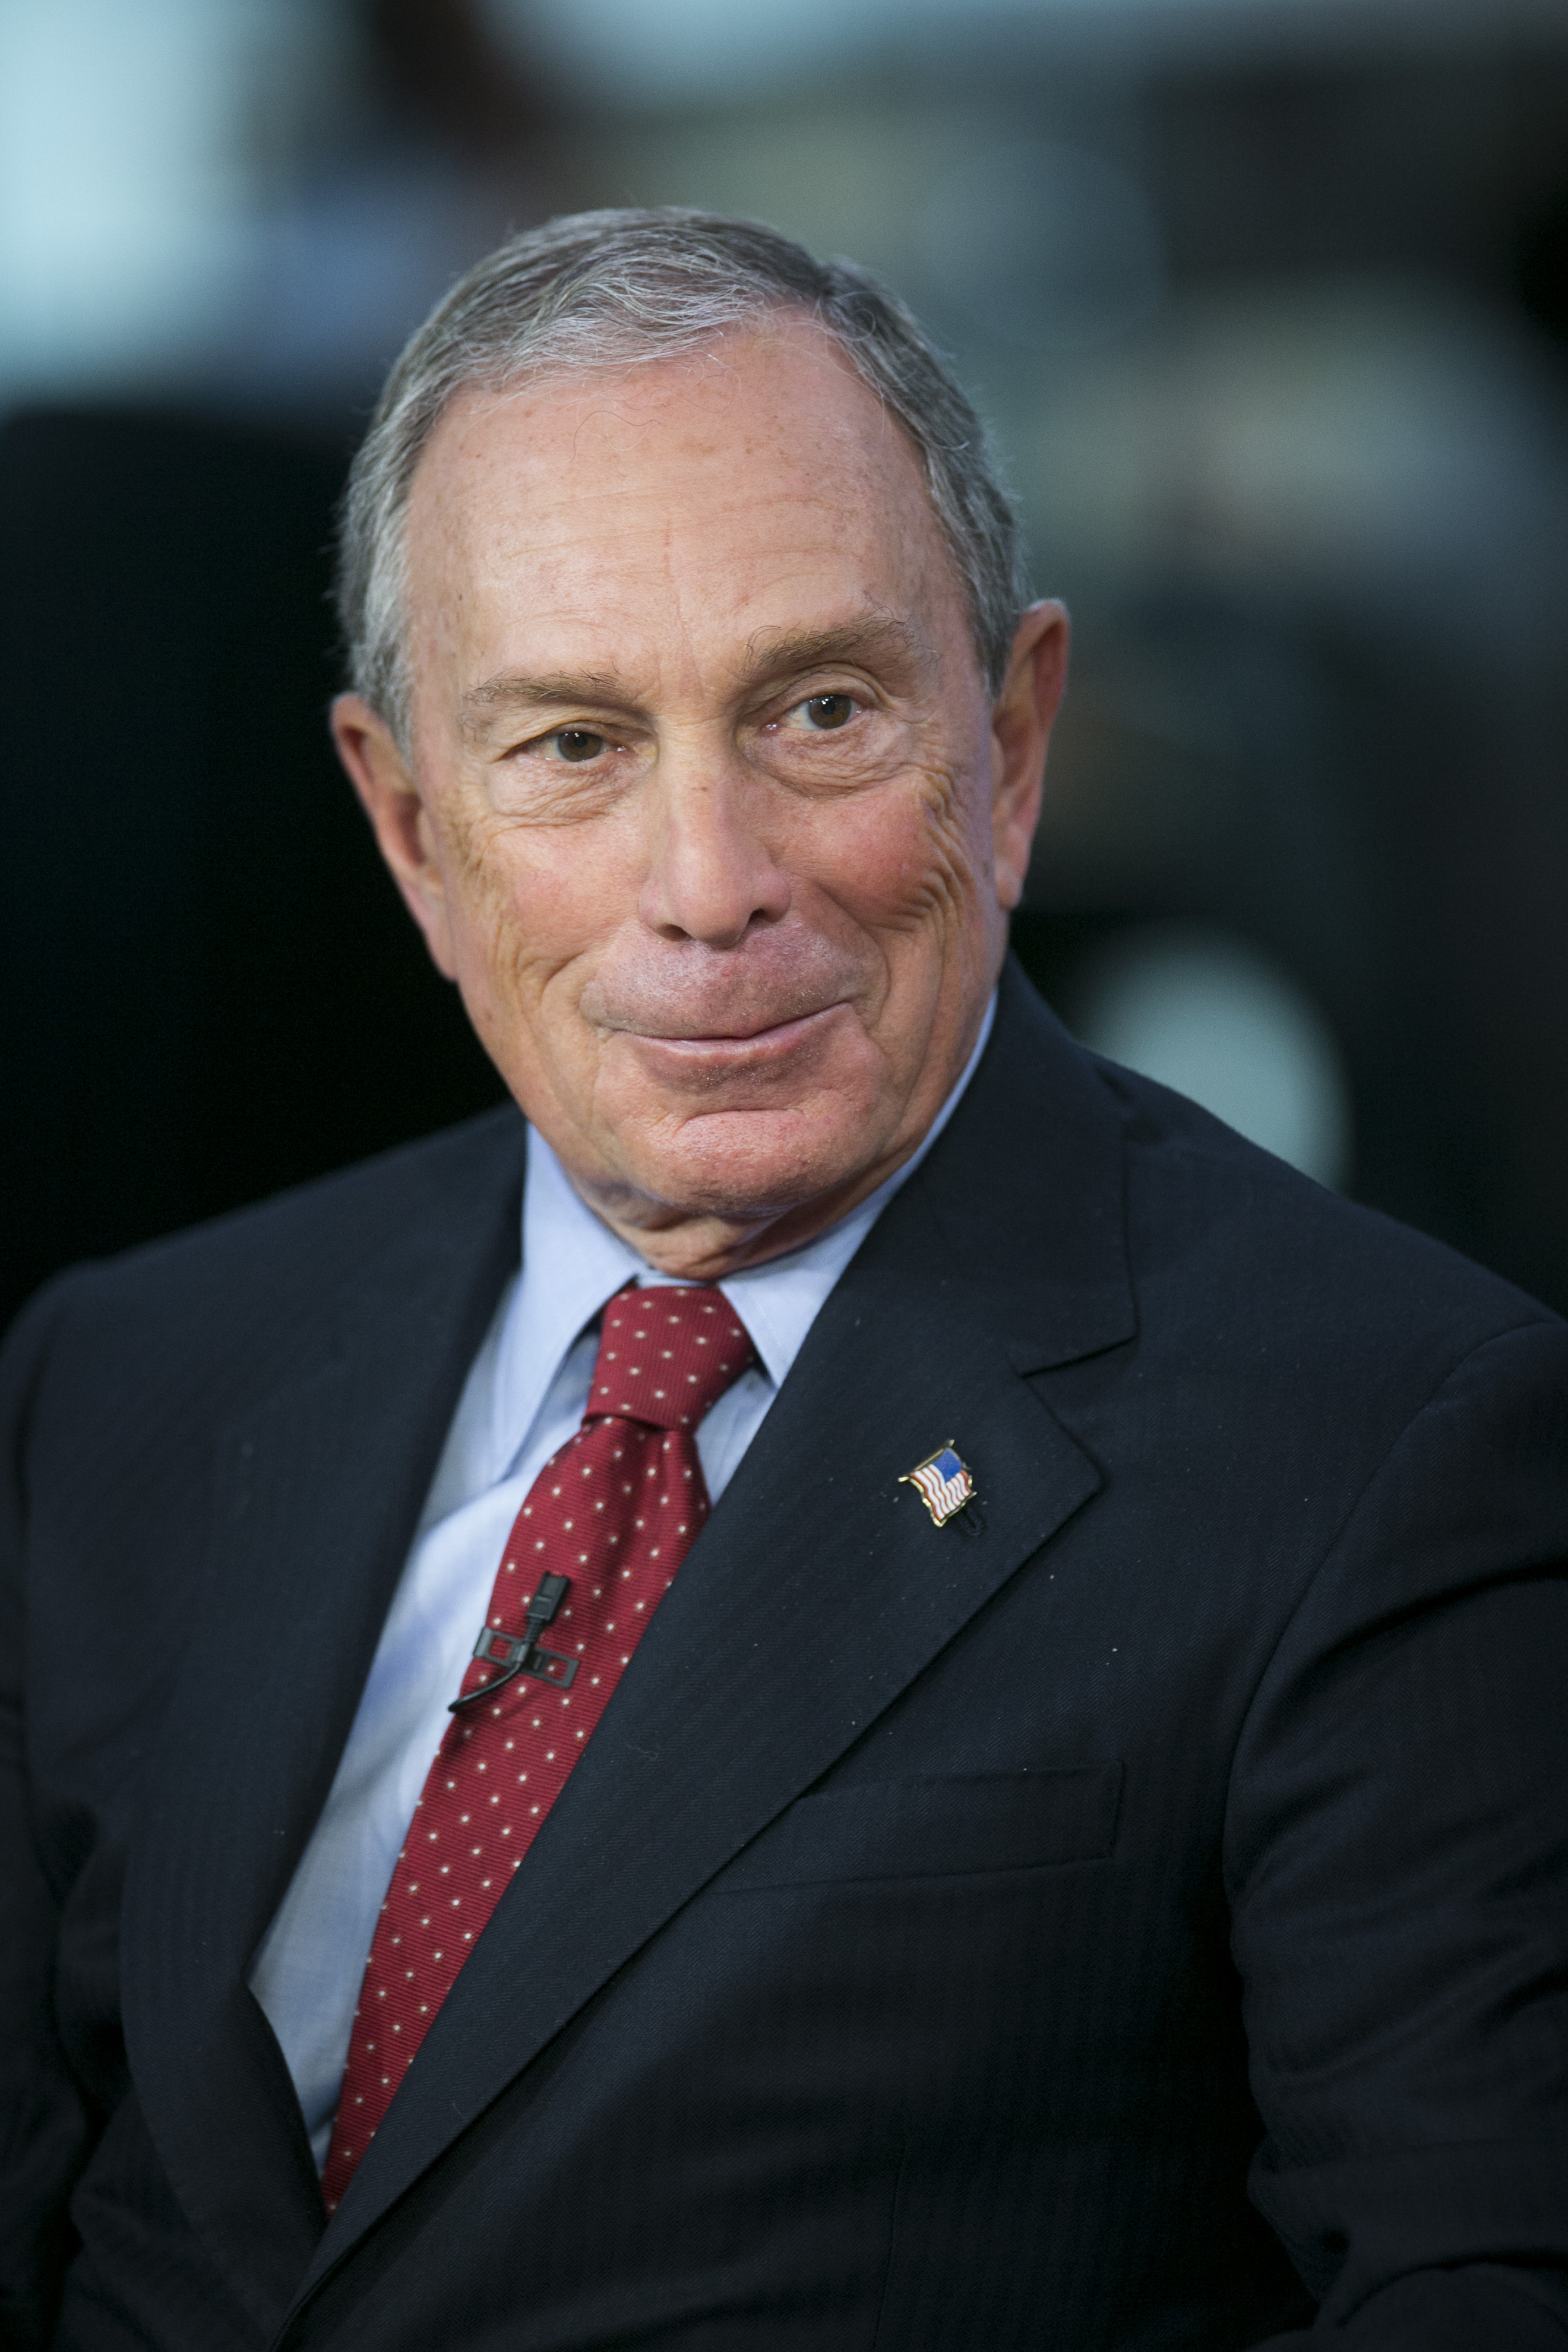 Michael Bloomberg during a Bloomberg Television interview with Lloyd Blankfein, chief executive officer of Goldman Sachs Group Inc. (not pictured) in New York City on June 3, 2014. (Scott Eells—Bloomberg/Getty Images)